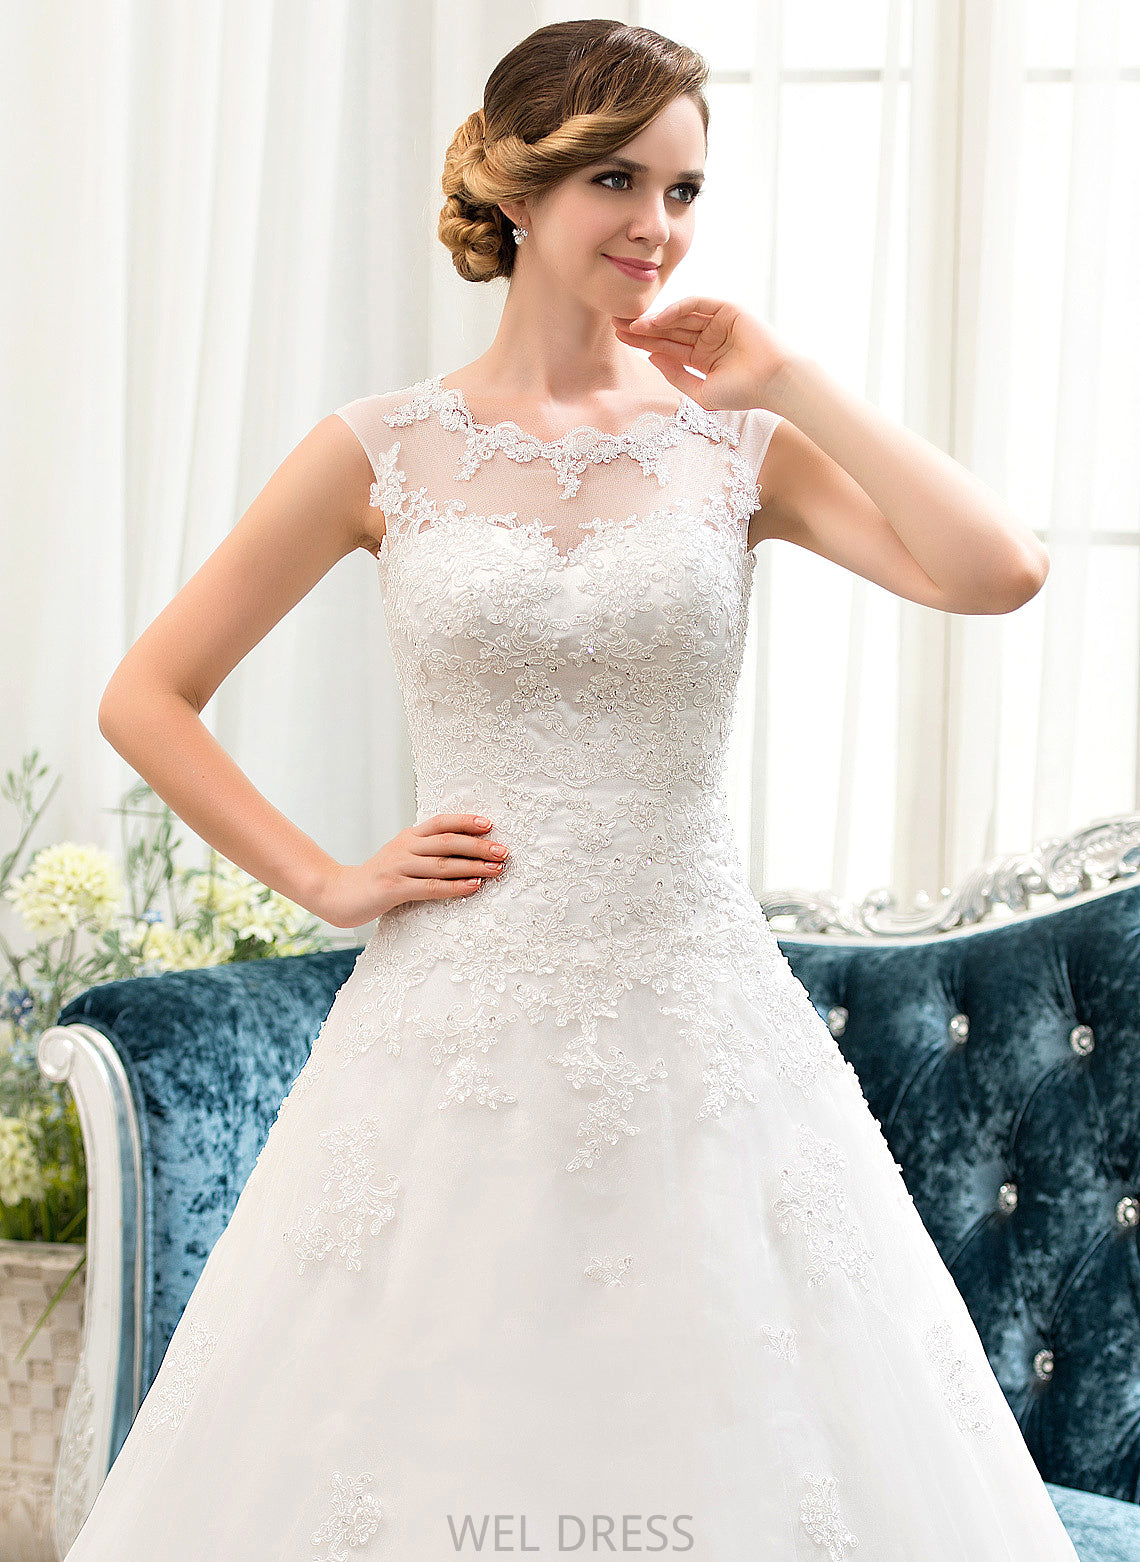 Organza Wedding Wedding Dresses With Sweep Tulle Dress Illusion Beading Sequins Train Monica Ball-Gown/Princess